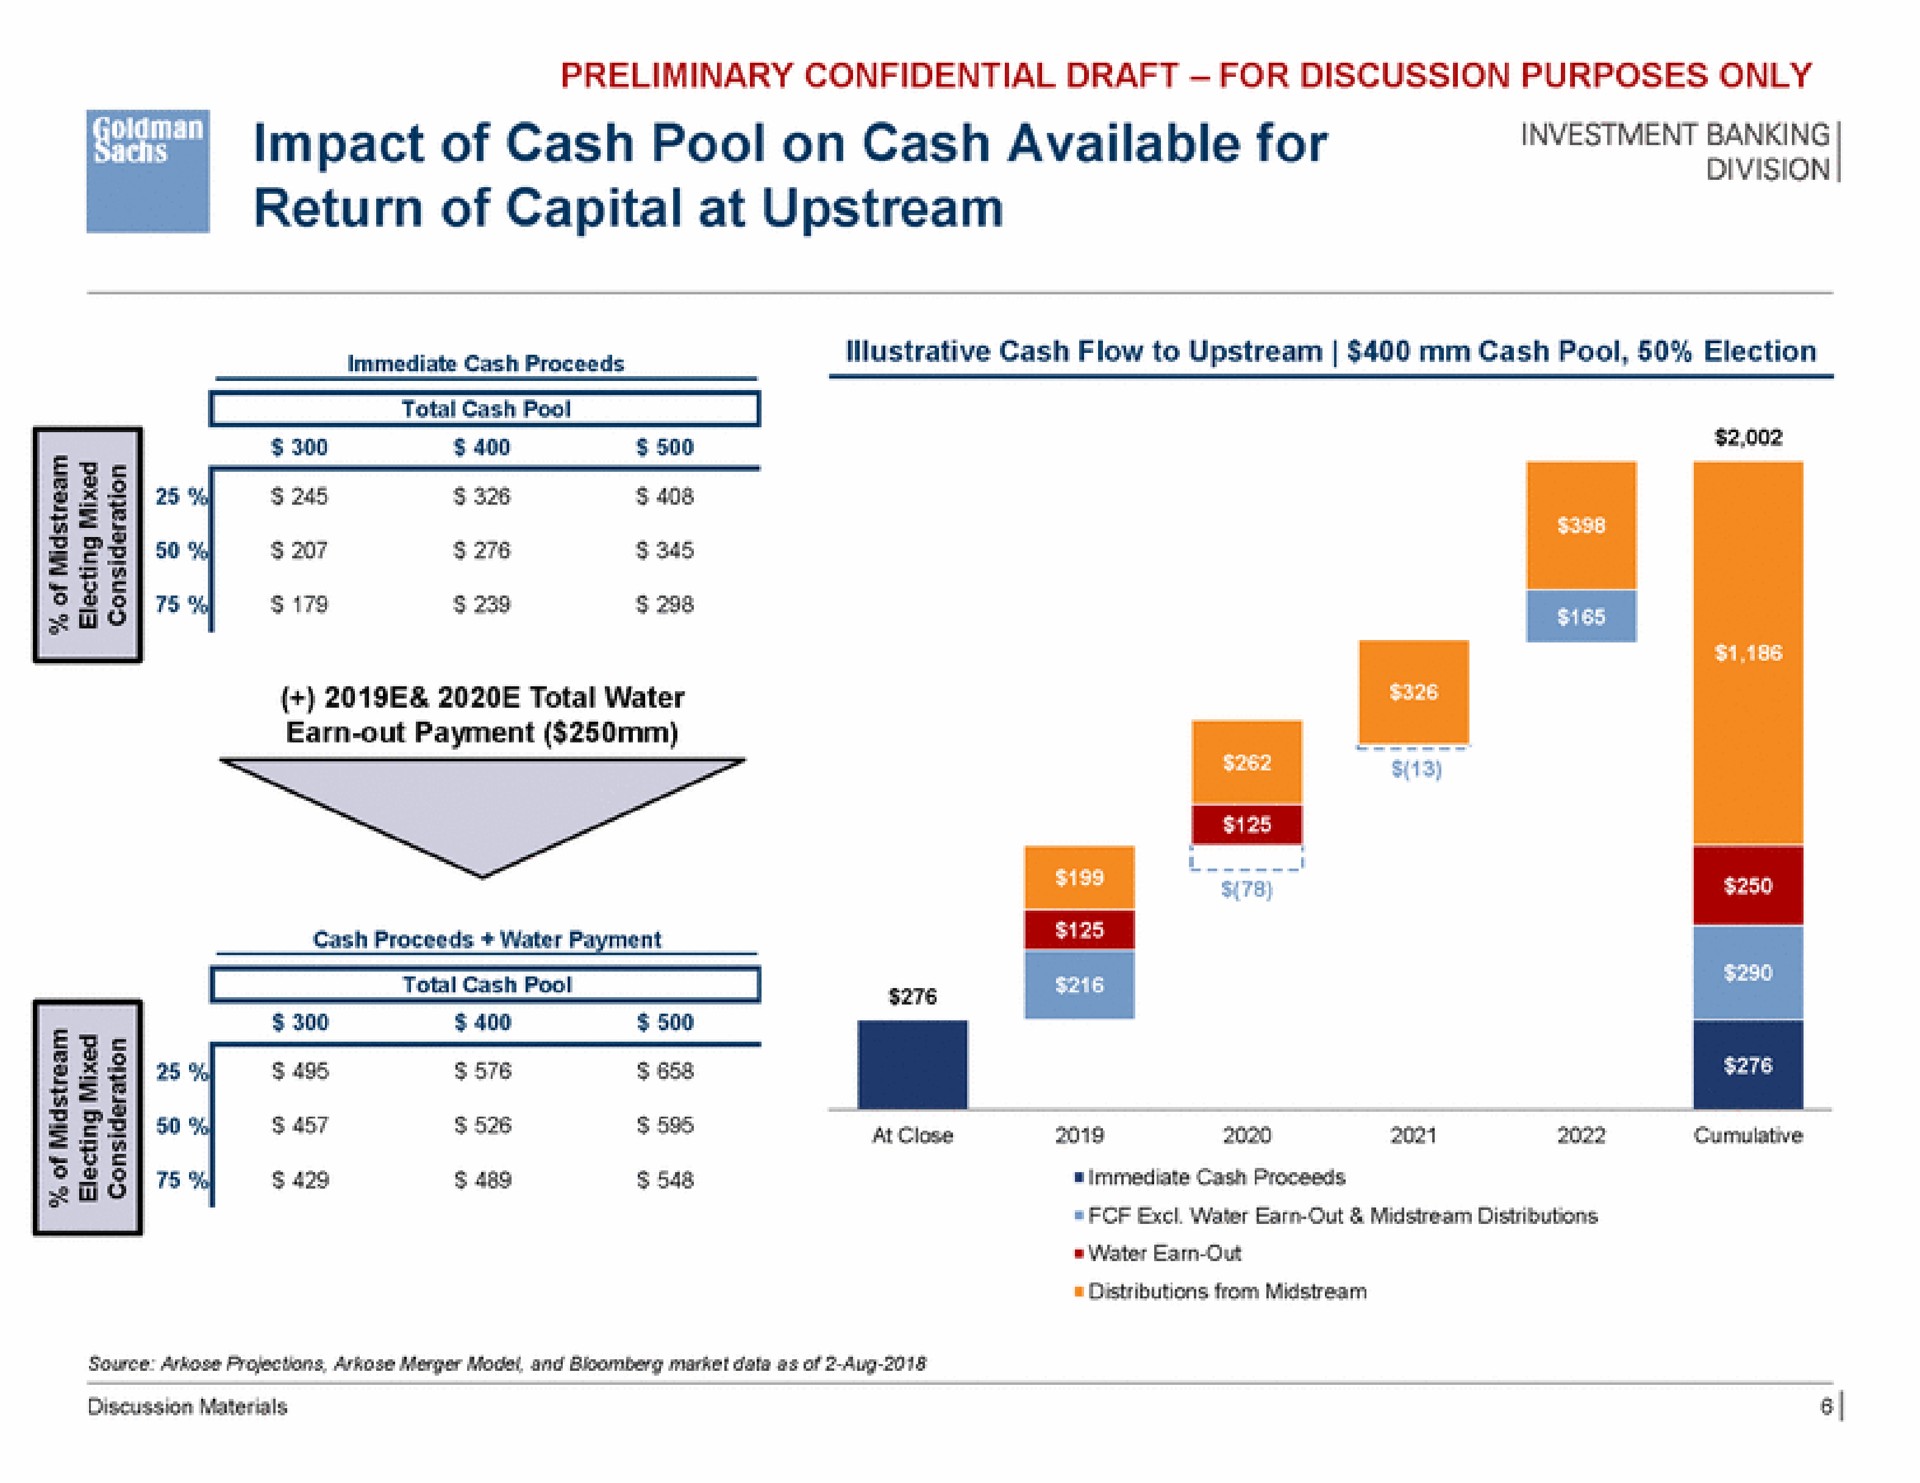 impact of cash pool on cash available for return of capital at upstream i | Goldman Sachs